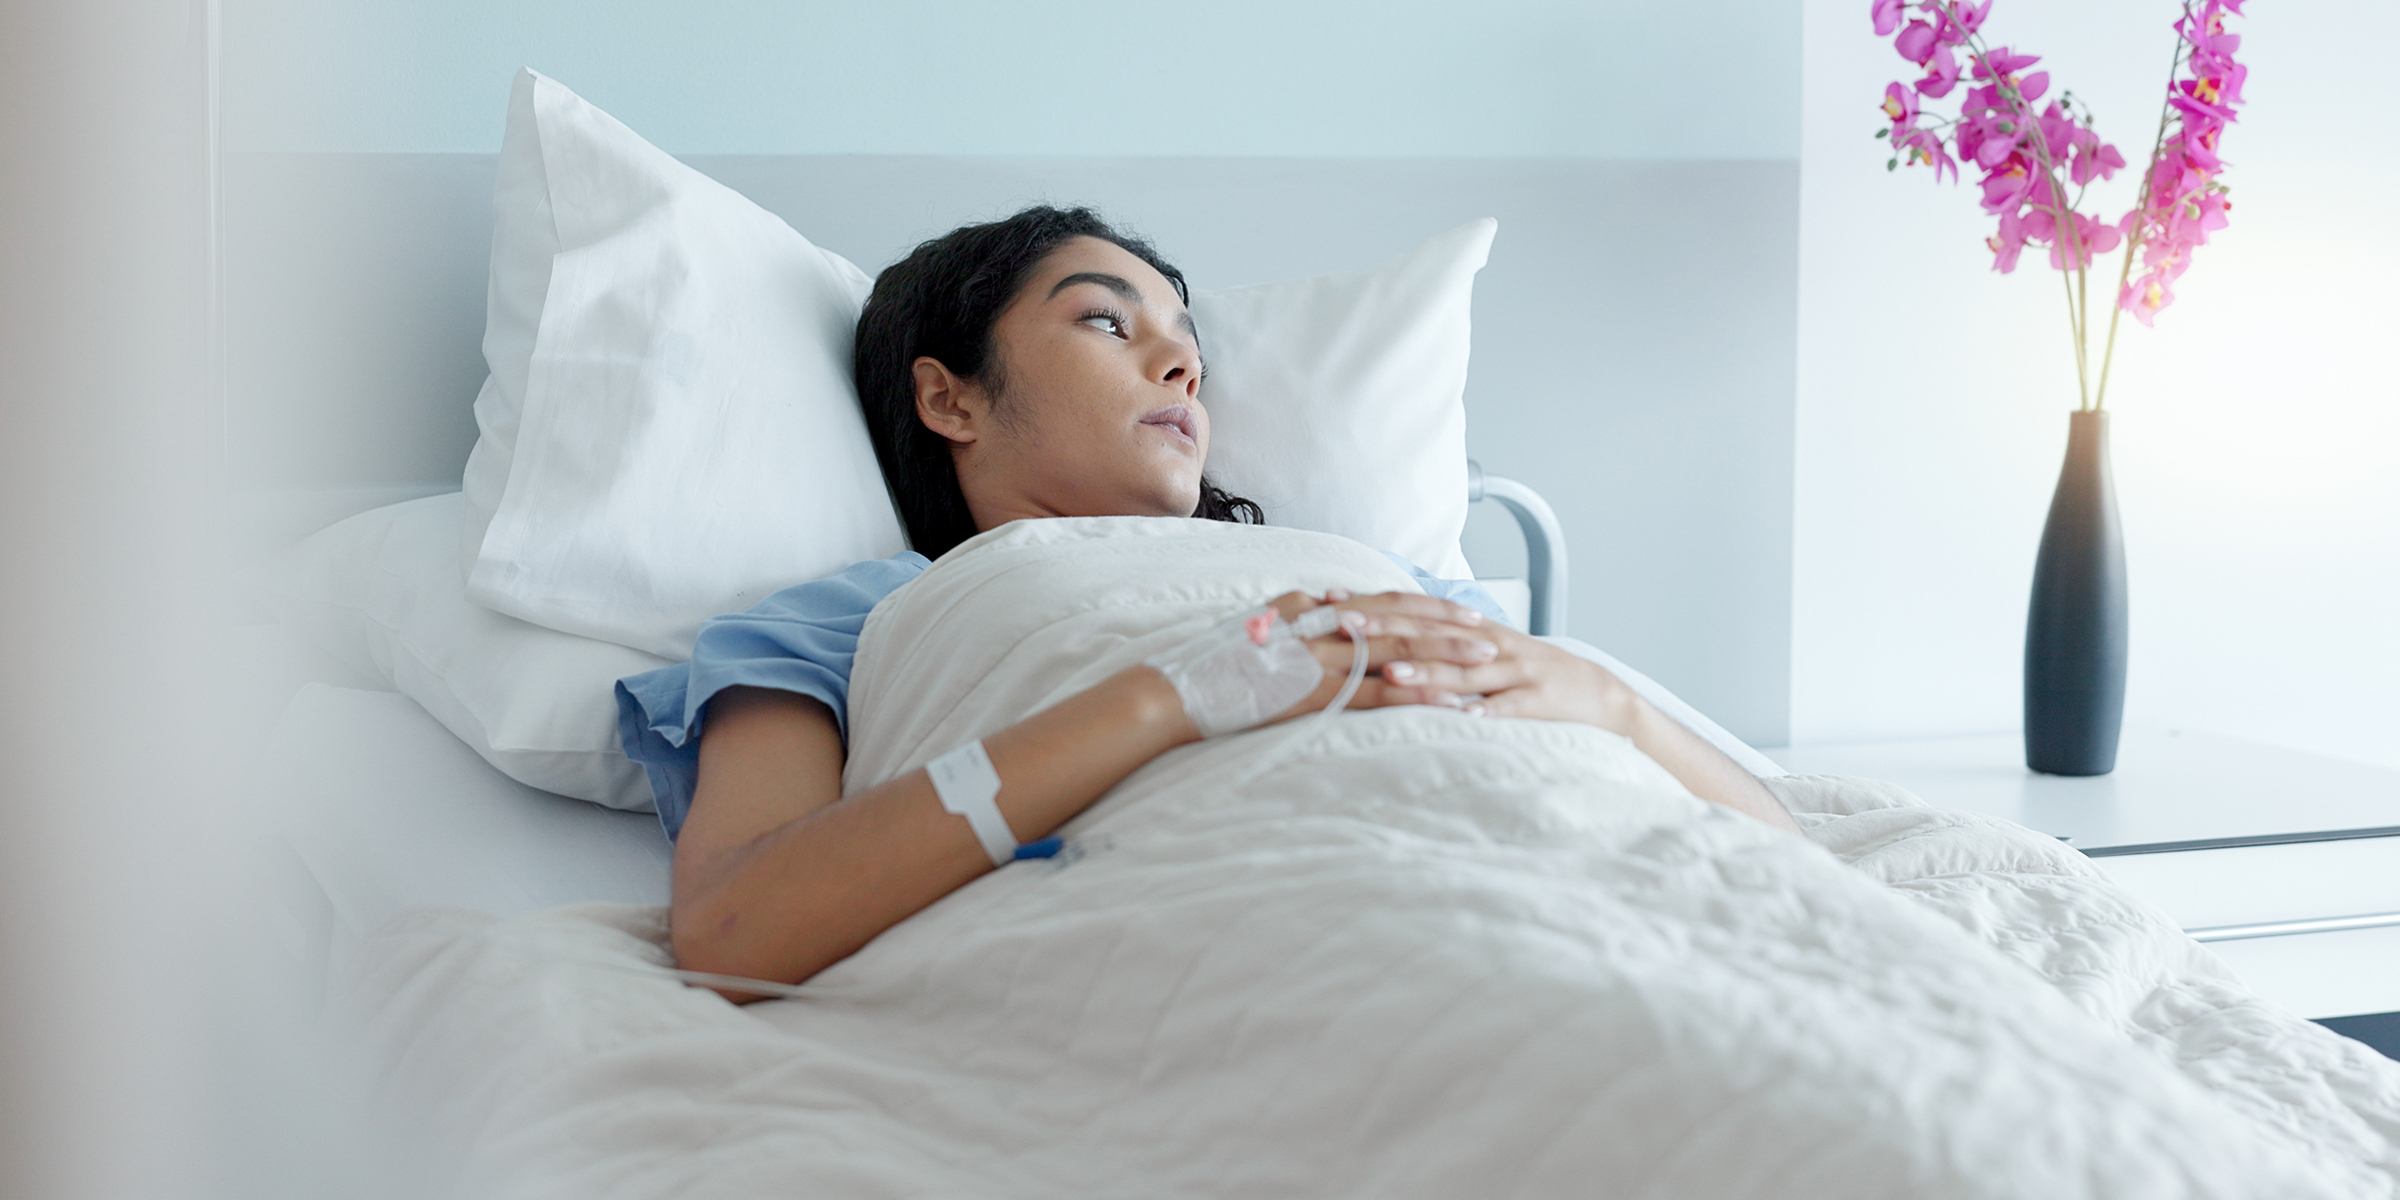 A woman in a hospital bed | Source: Shutterstock